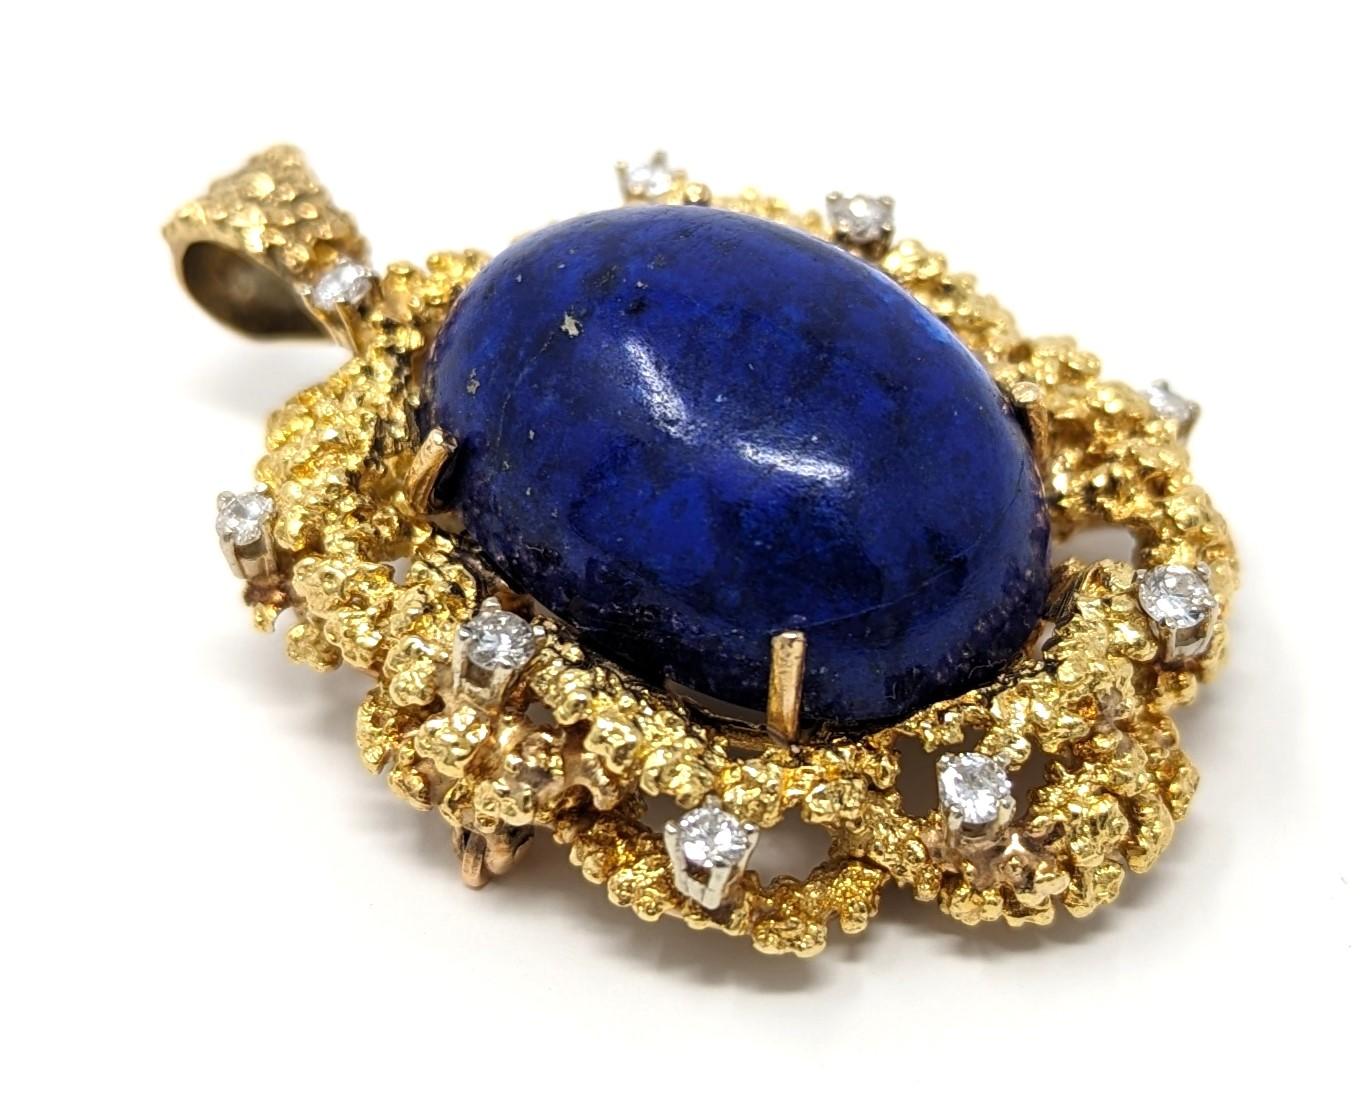 Exquisite vintage 18k lapis lazuli convertible pendant / brooch, adorned with dazzling diamonds. This brutalist style pendant is a great example of mid century art and craftsmanship. Stamped 